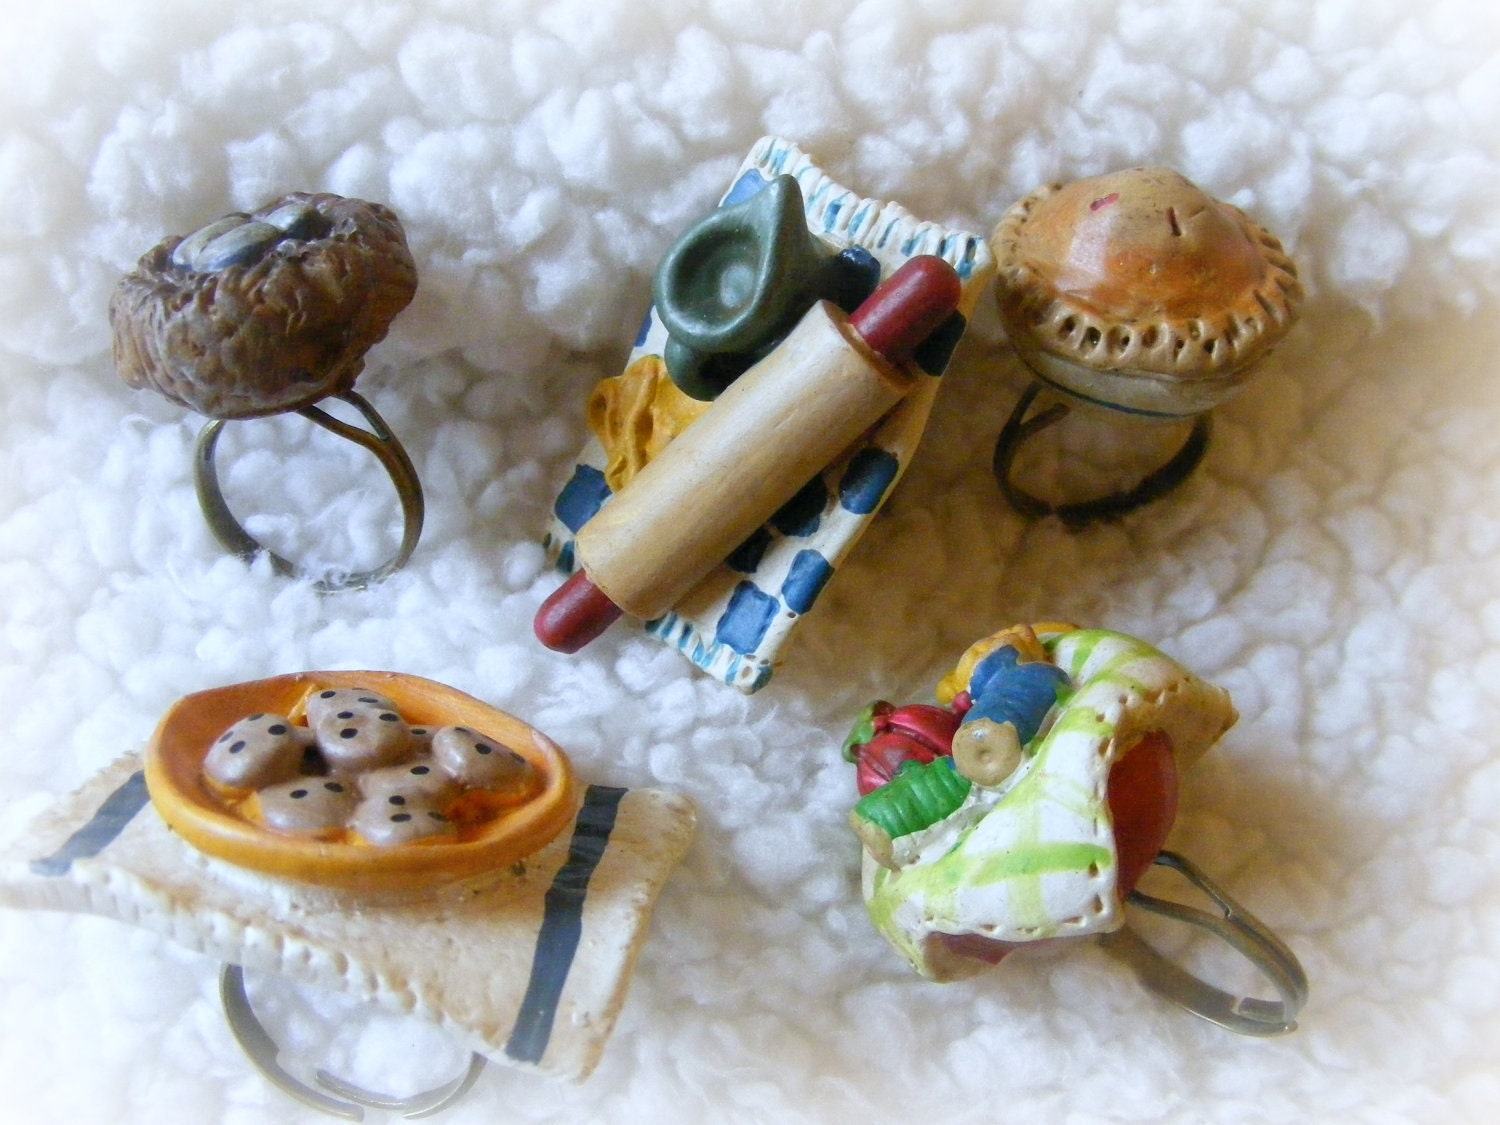 Rings Your Choice of Style Pie, Nest, Cookies, Sewing Bowl, Bakers Tools